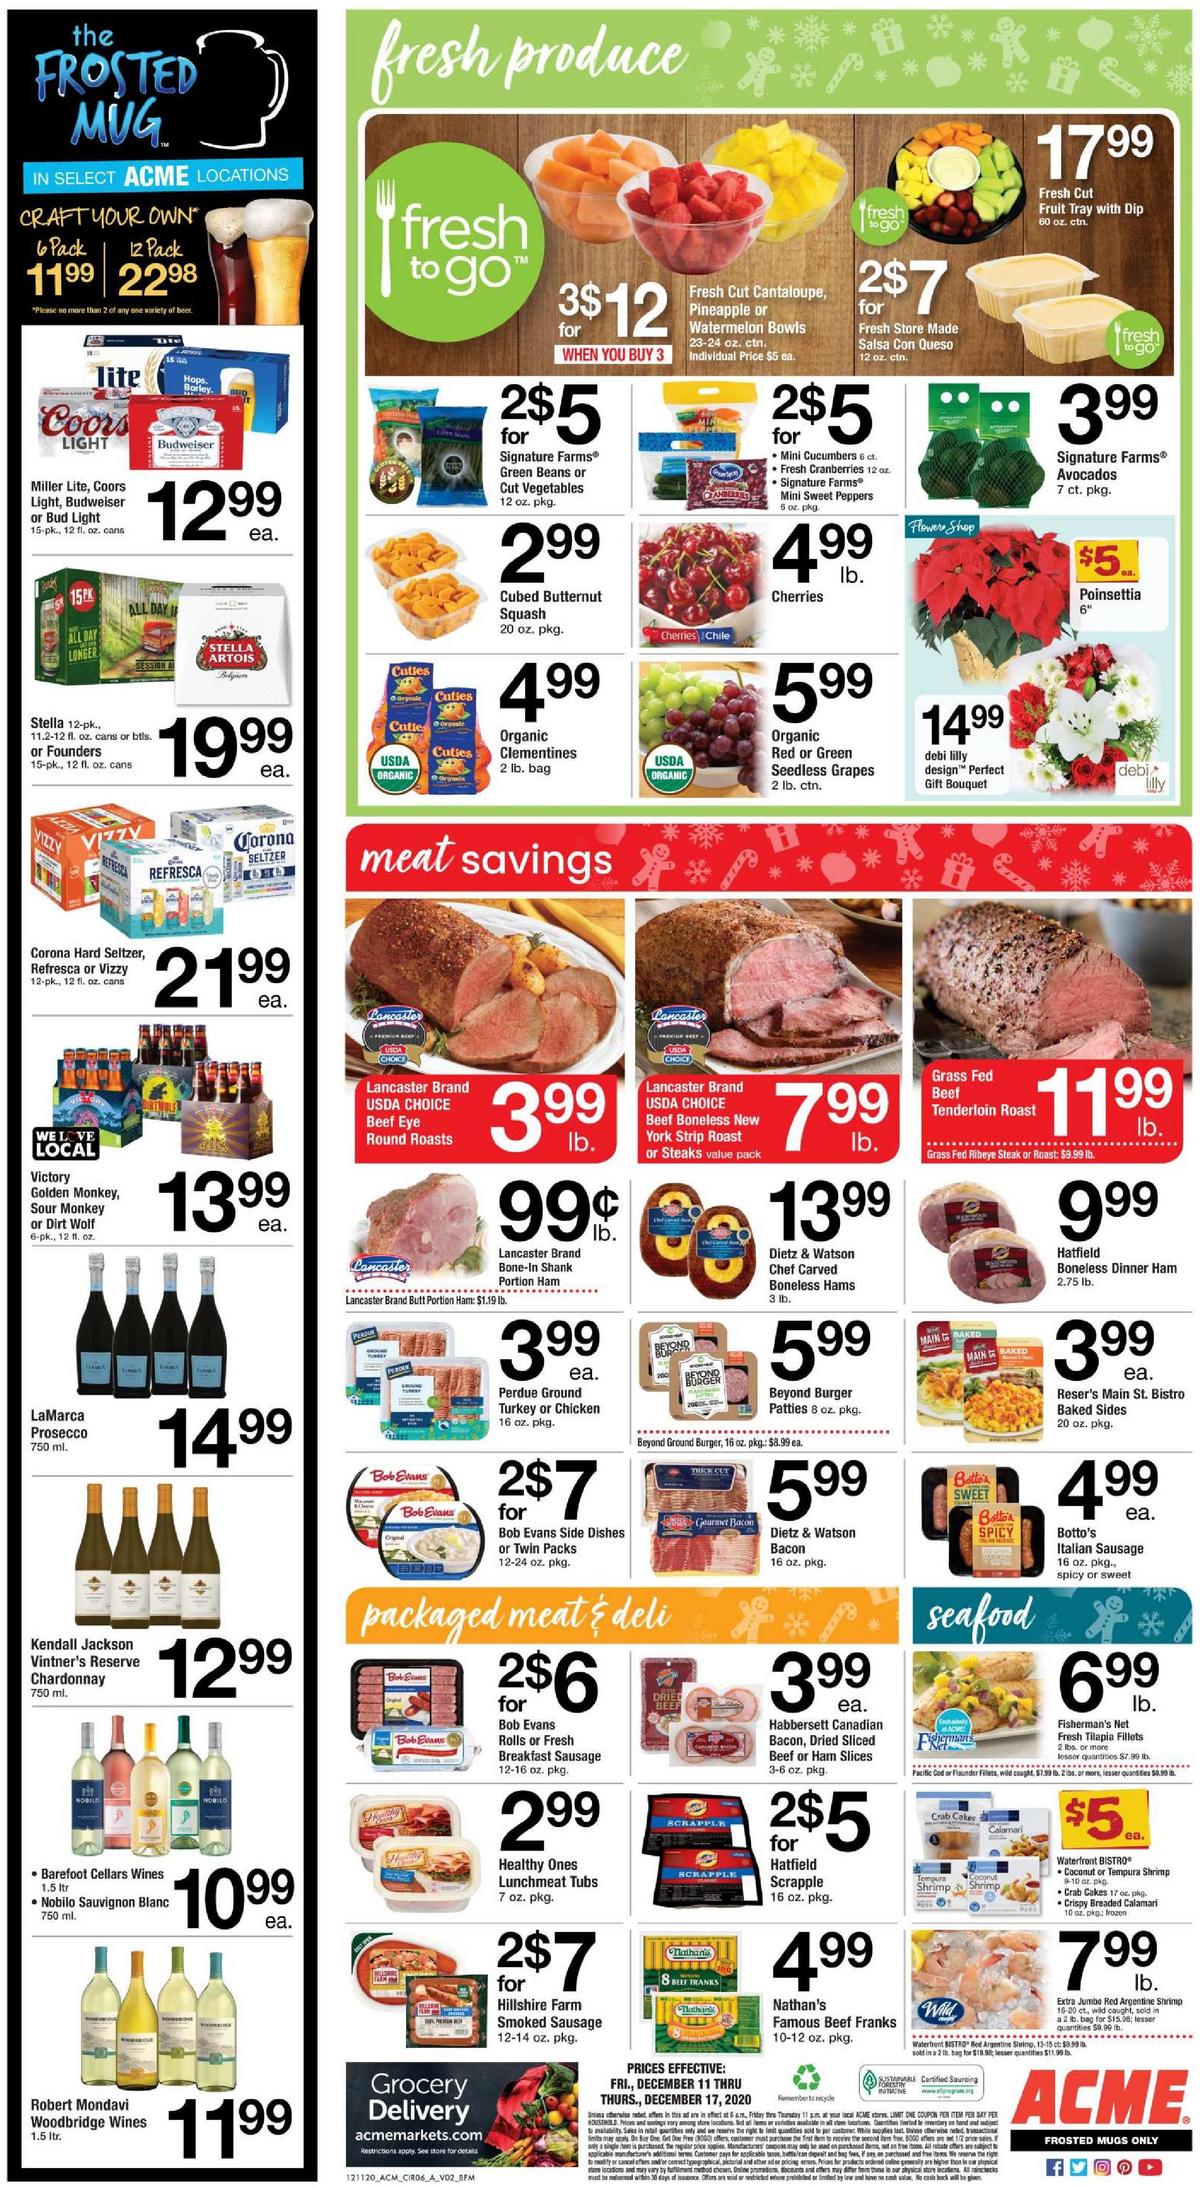 ACME Markets Weekly Ad from December 11